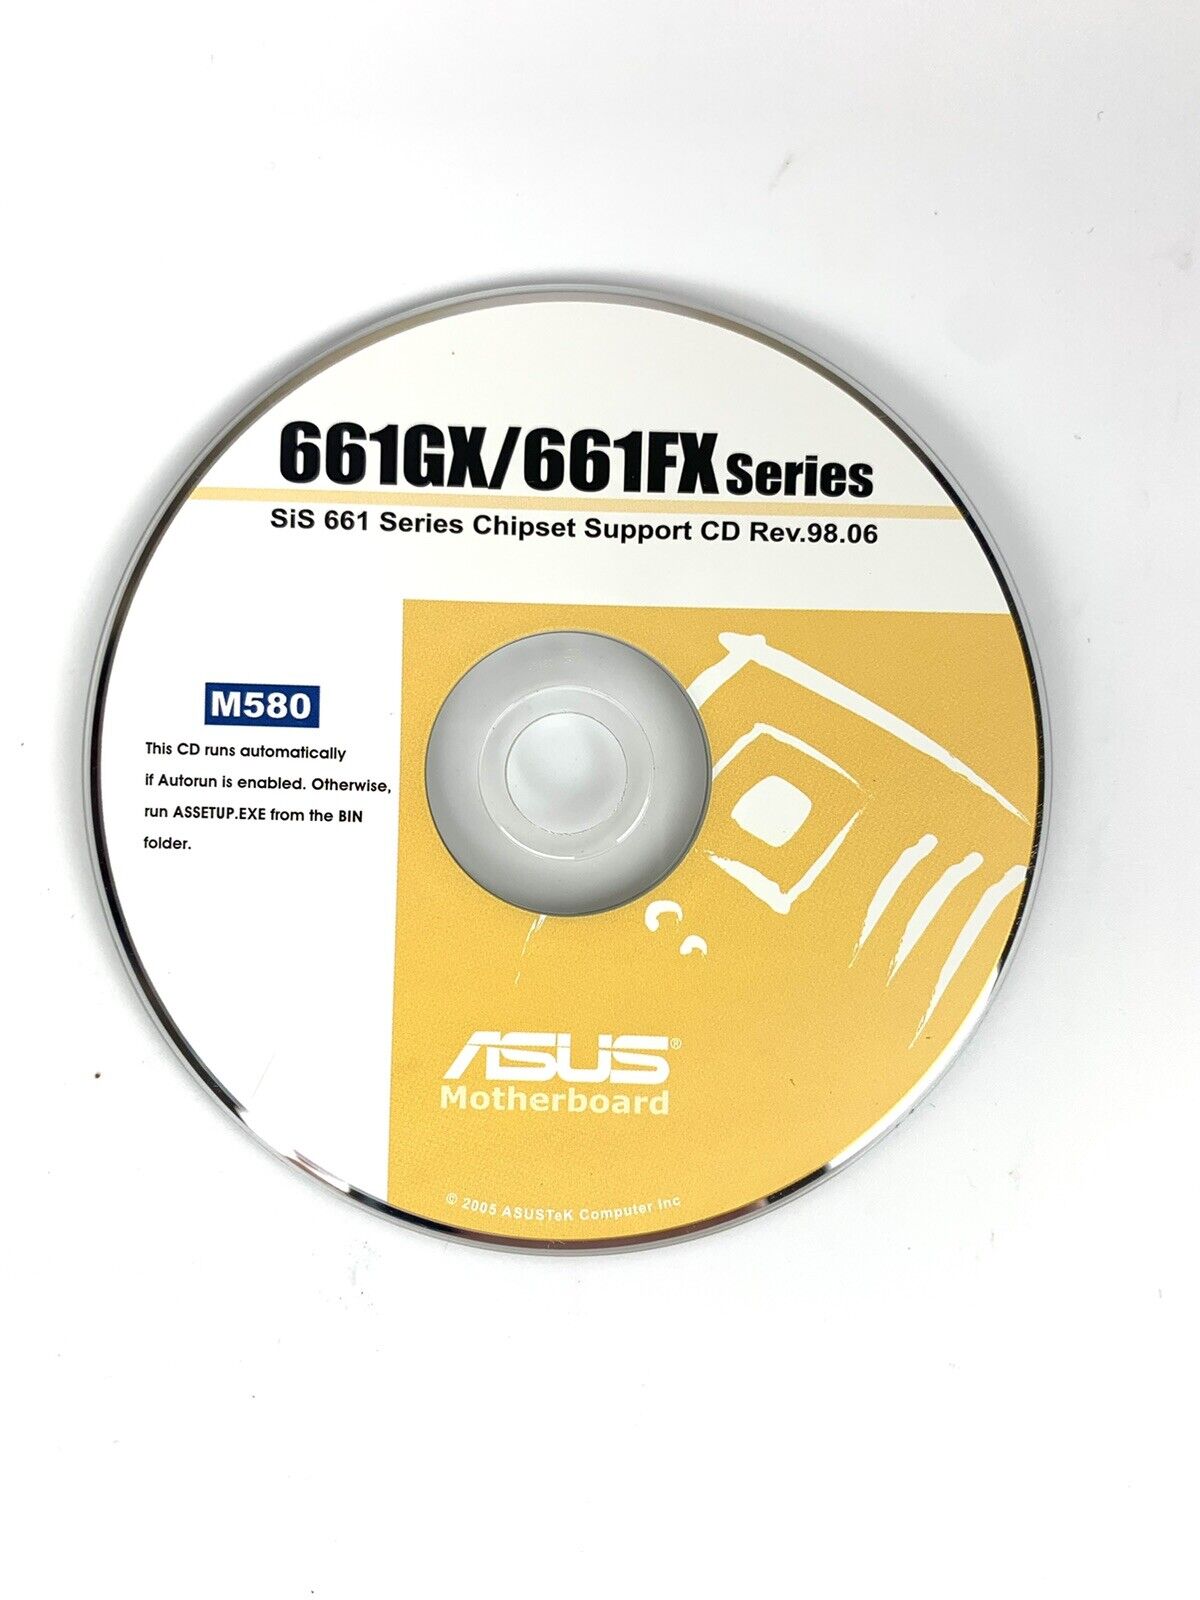 Driver Support Cd Asus 661gx/661fx Series Sis 661 Chipset M580 Rev.98.06 Support